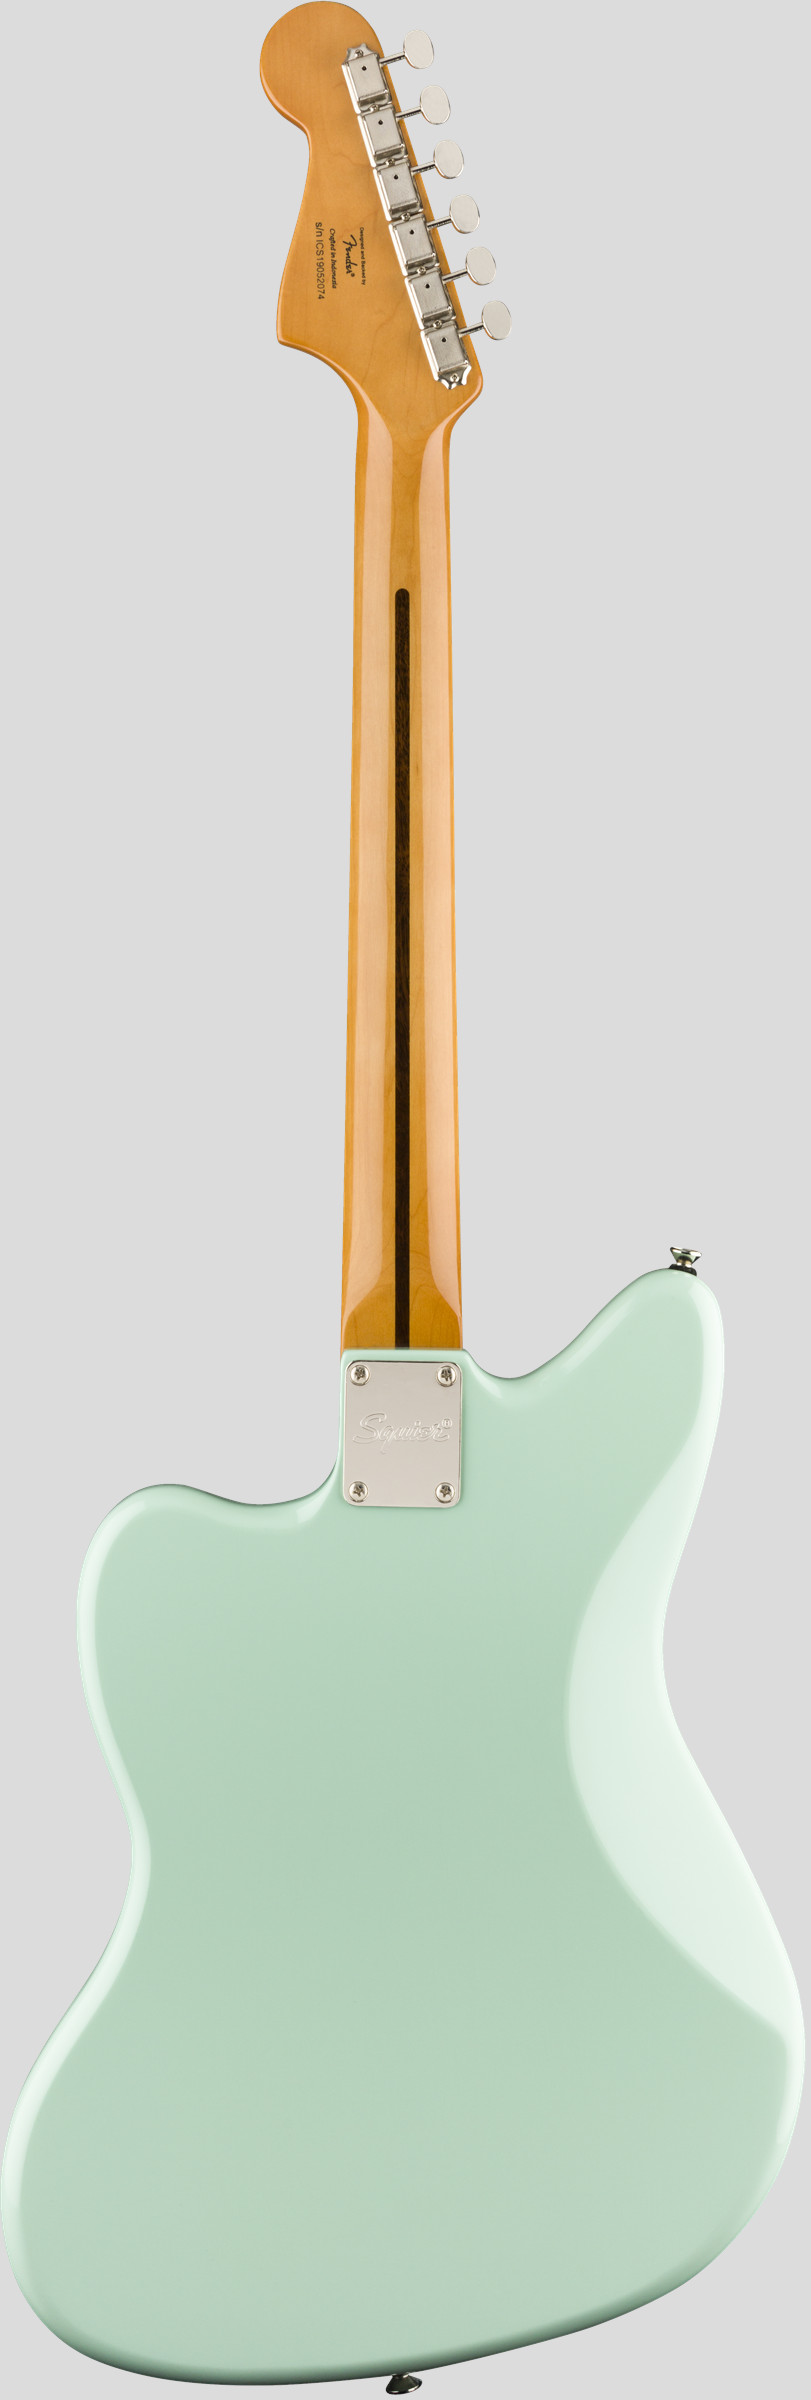 Squier by Fender Limited Edition Classic Vibe 60 Jazzmaster Surf Green 2